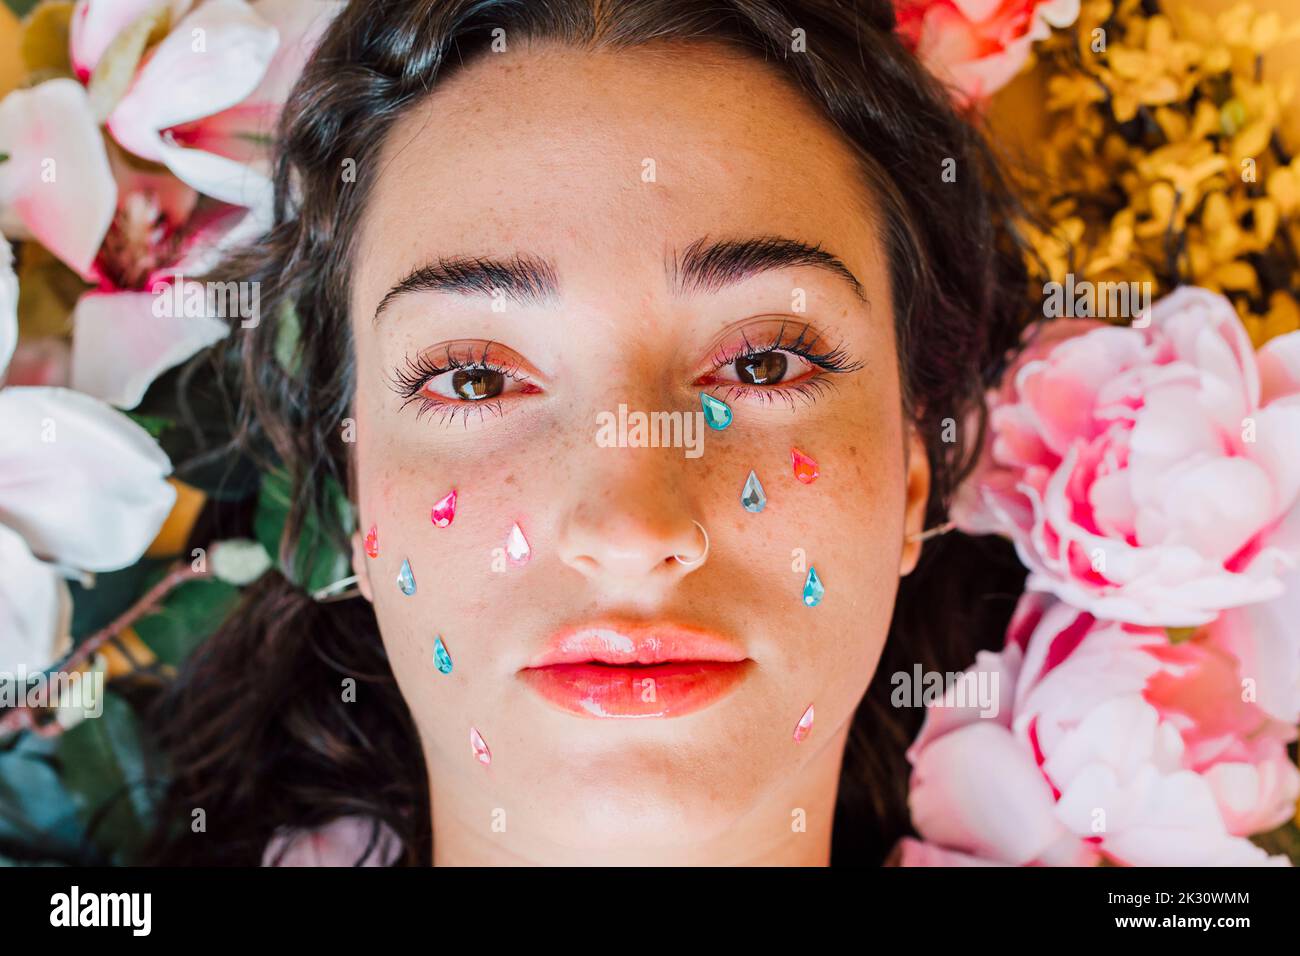 Sad young woman with teardrop stickers on cheeks Stock Photo